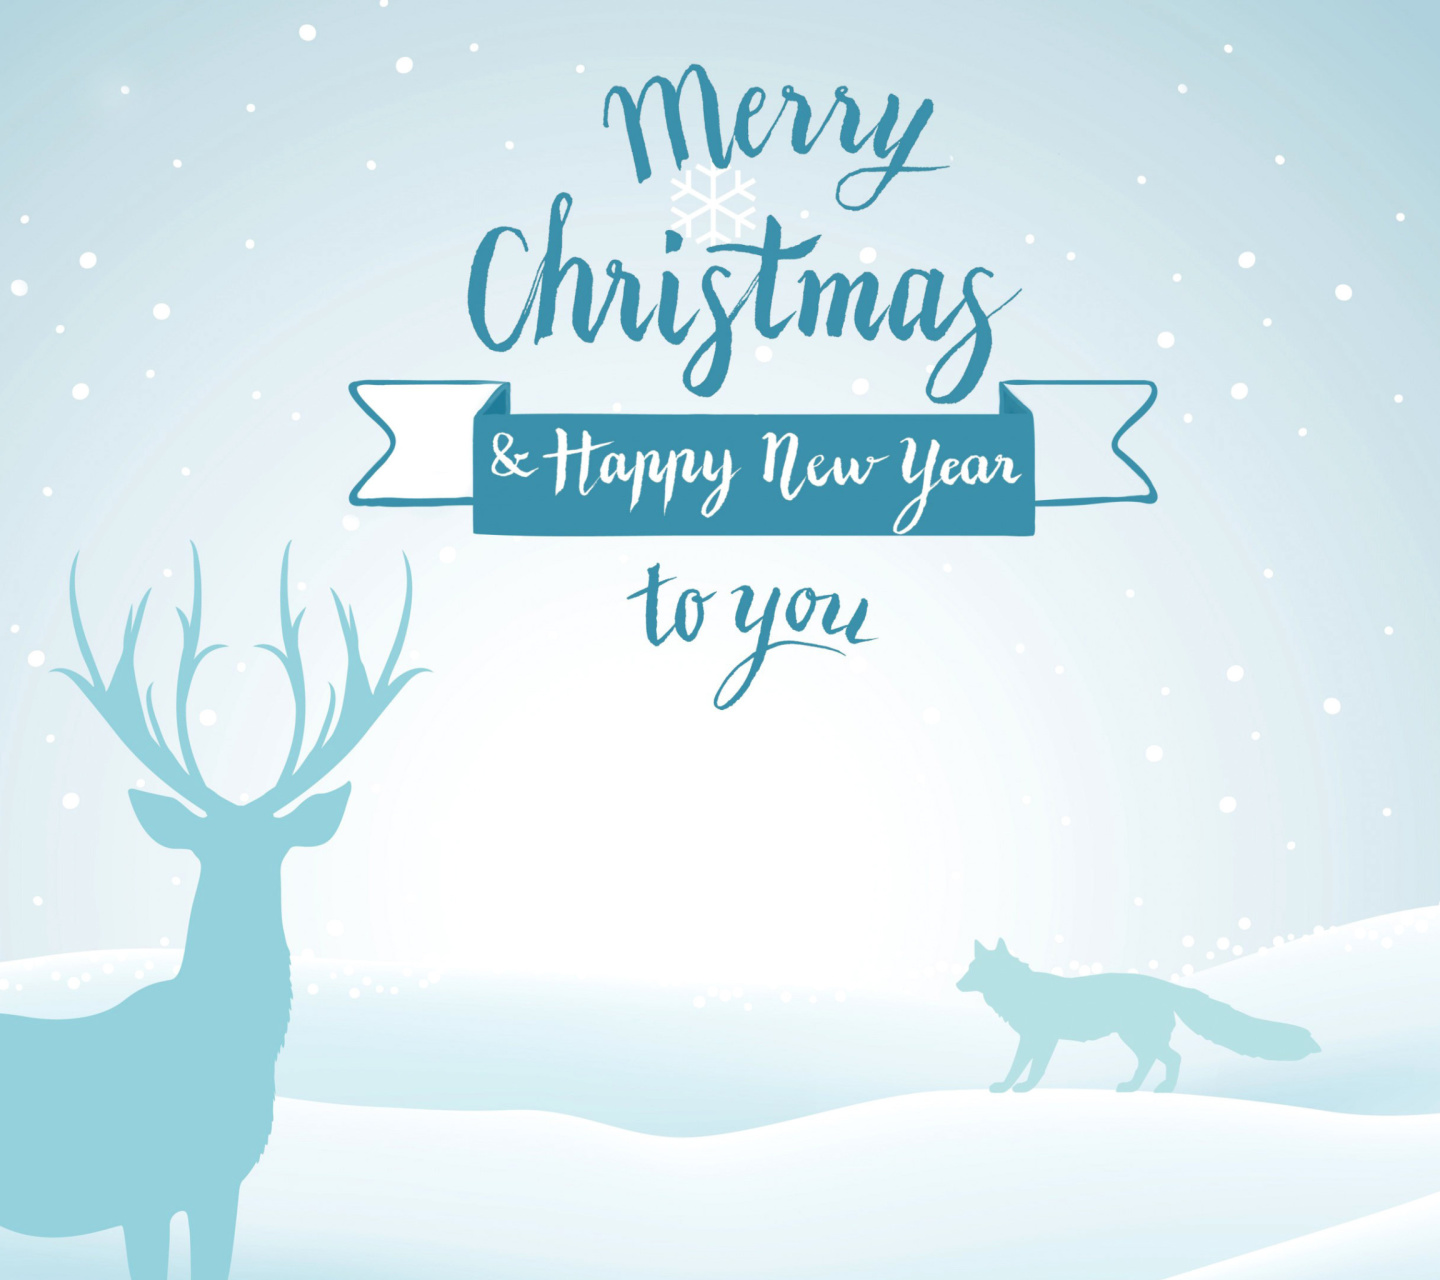 Merry Christmas and Happy New Year wallpaper 1440x1280